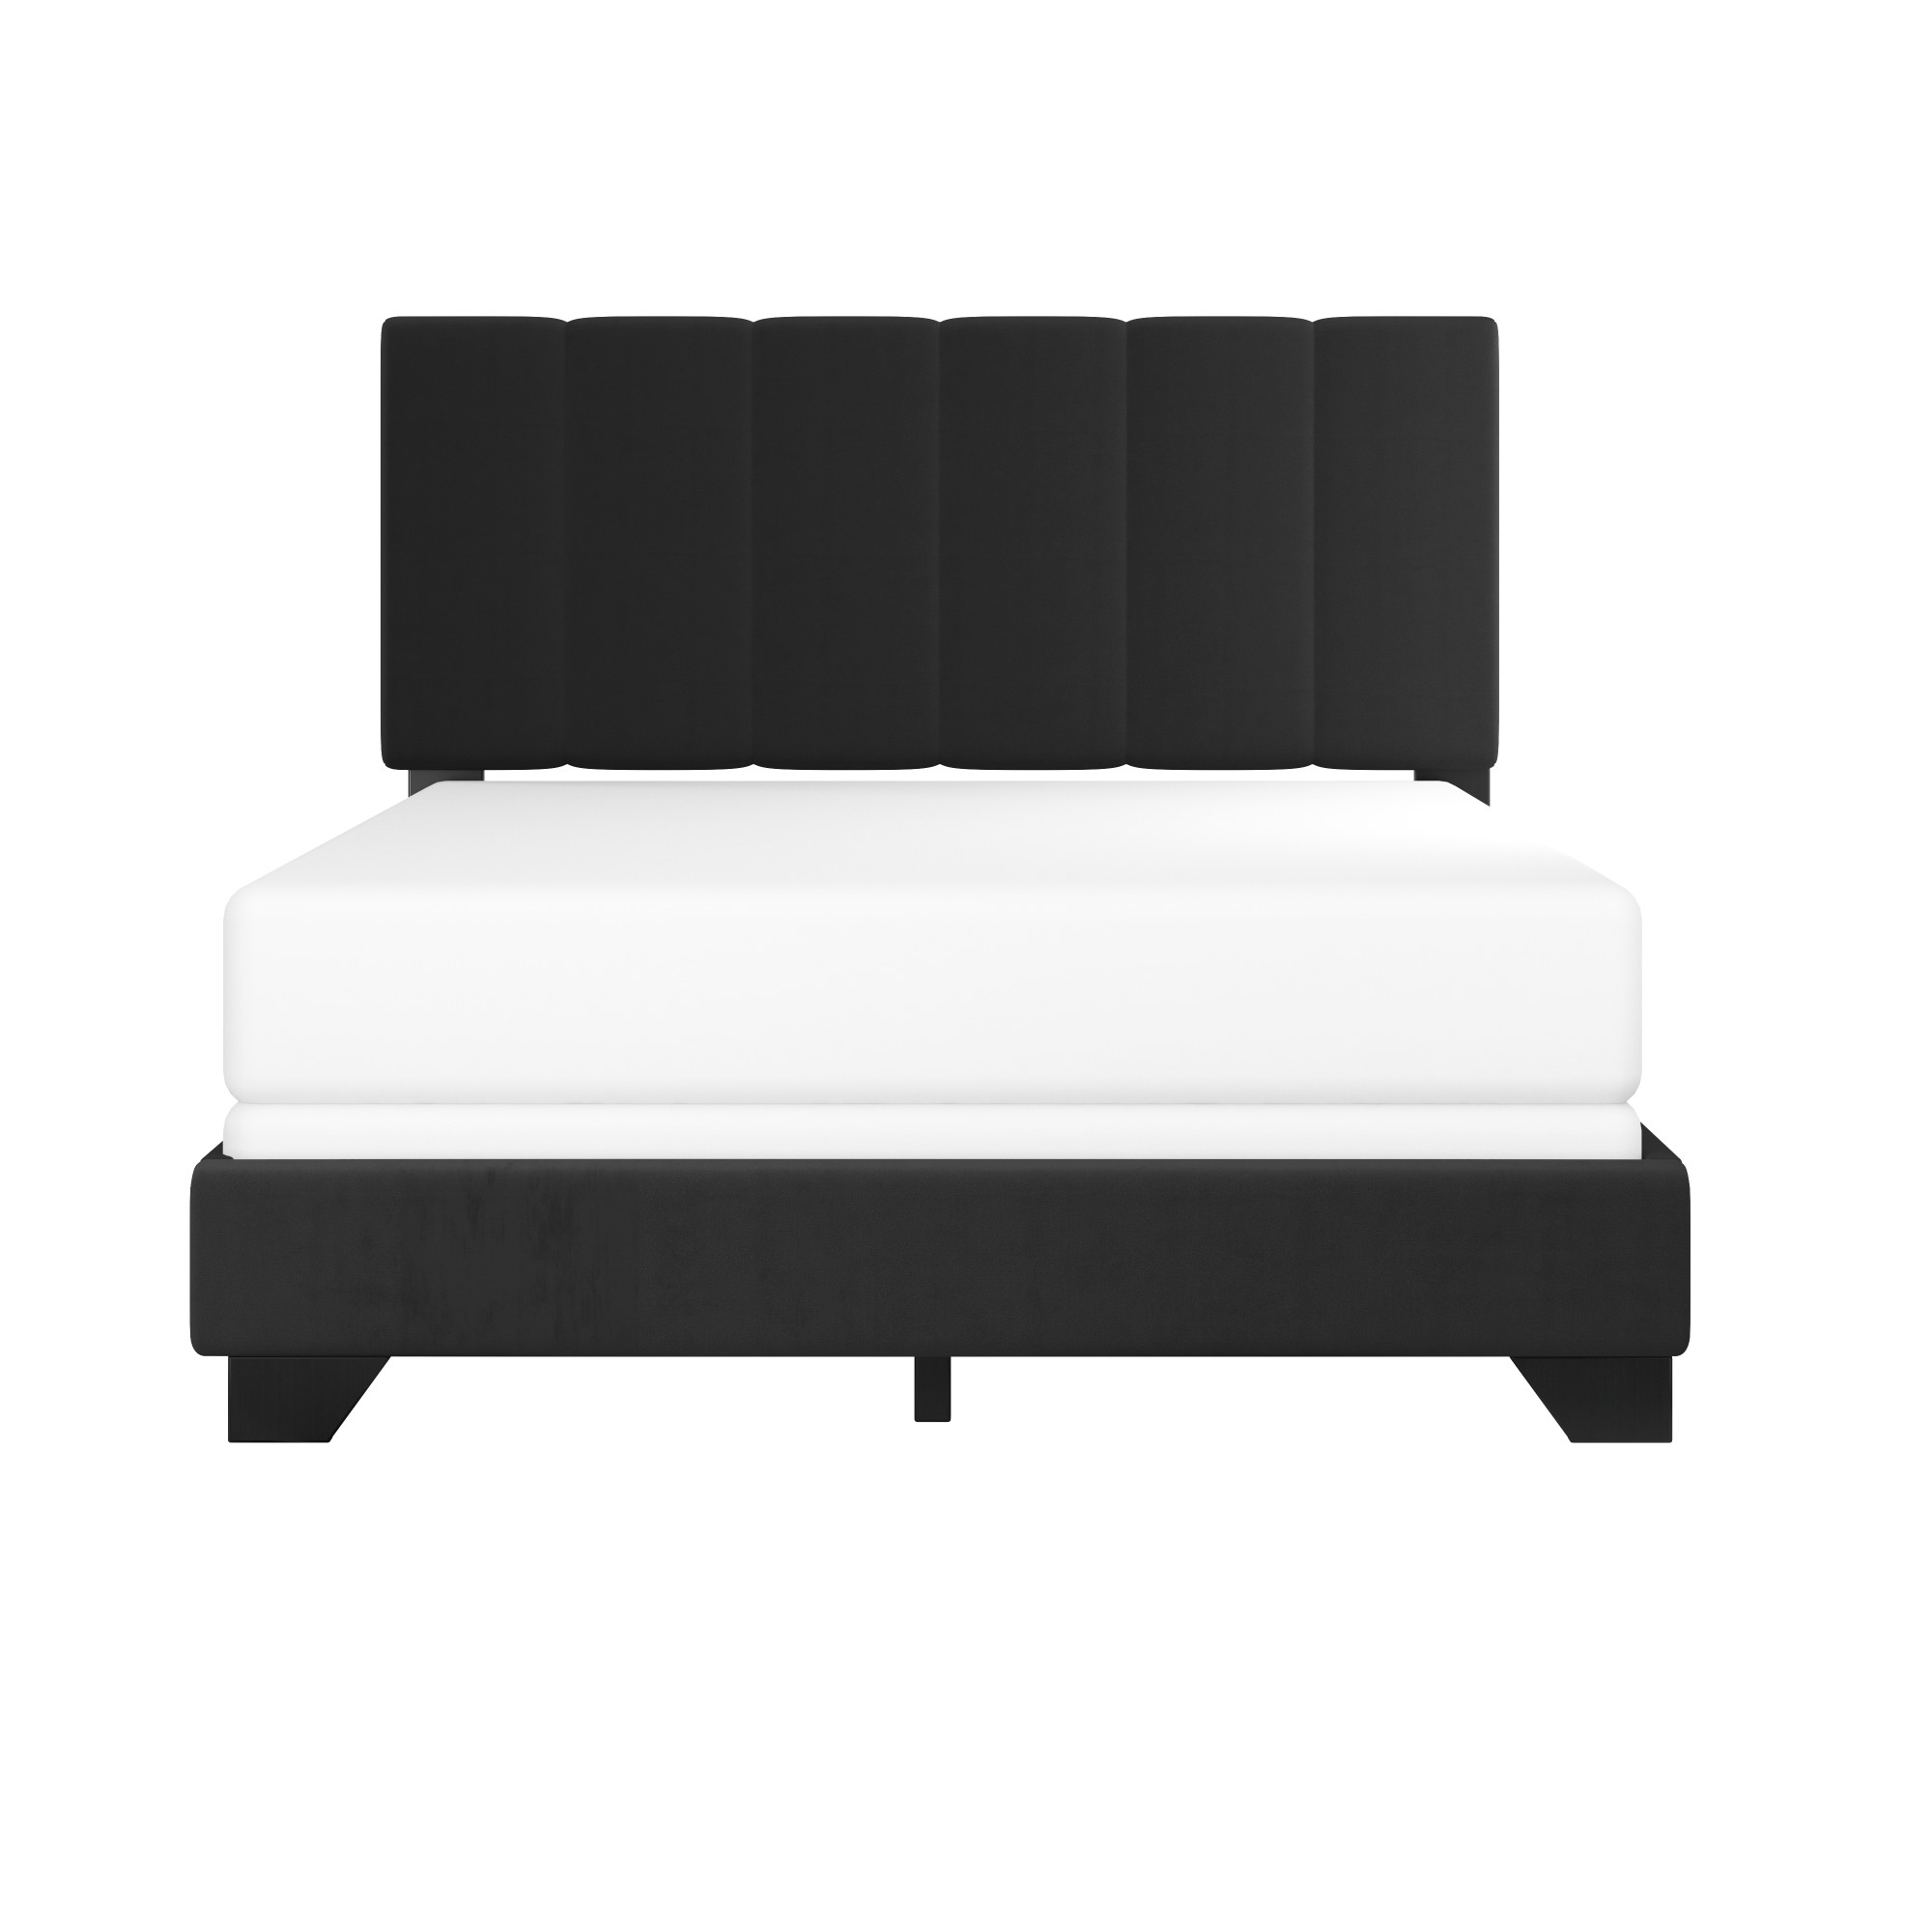 Reece Channel Stitched Upholstered Full Bed, Black, by Hillsdale Living Essentials - image 2 of 17